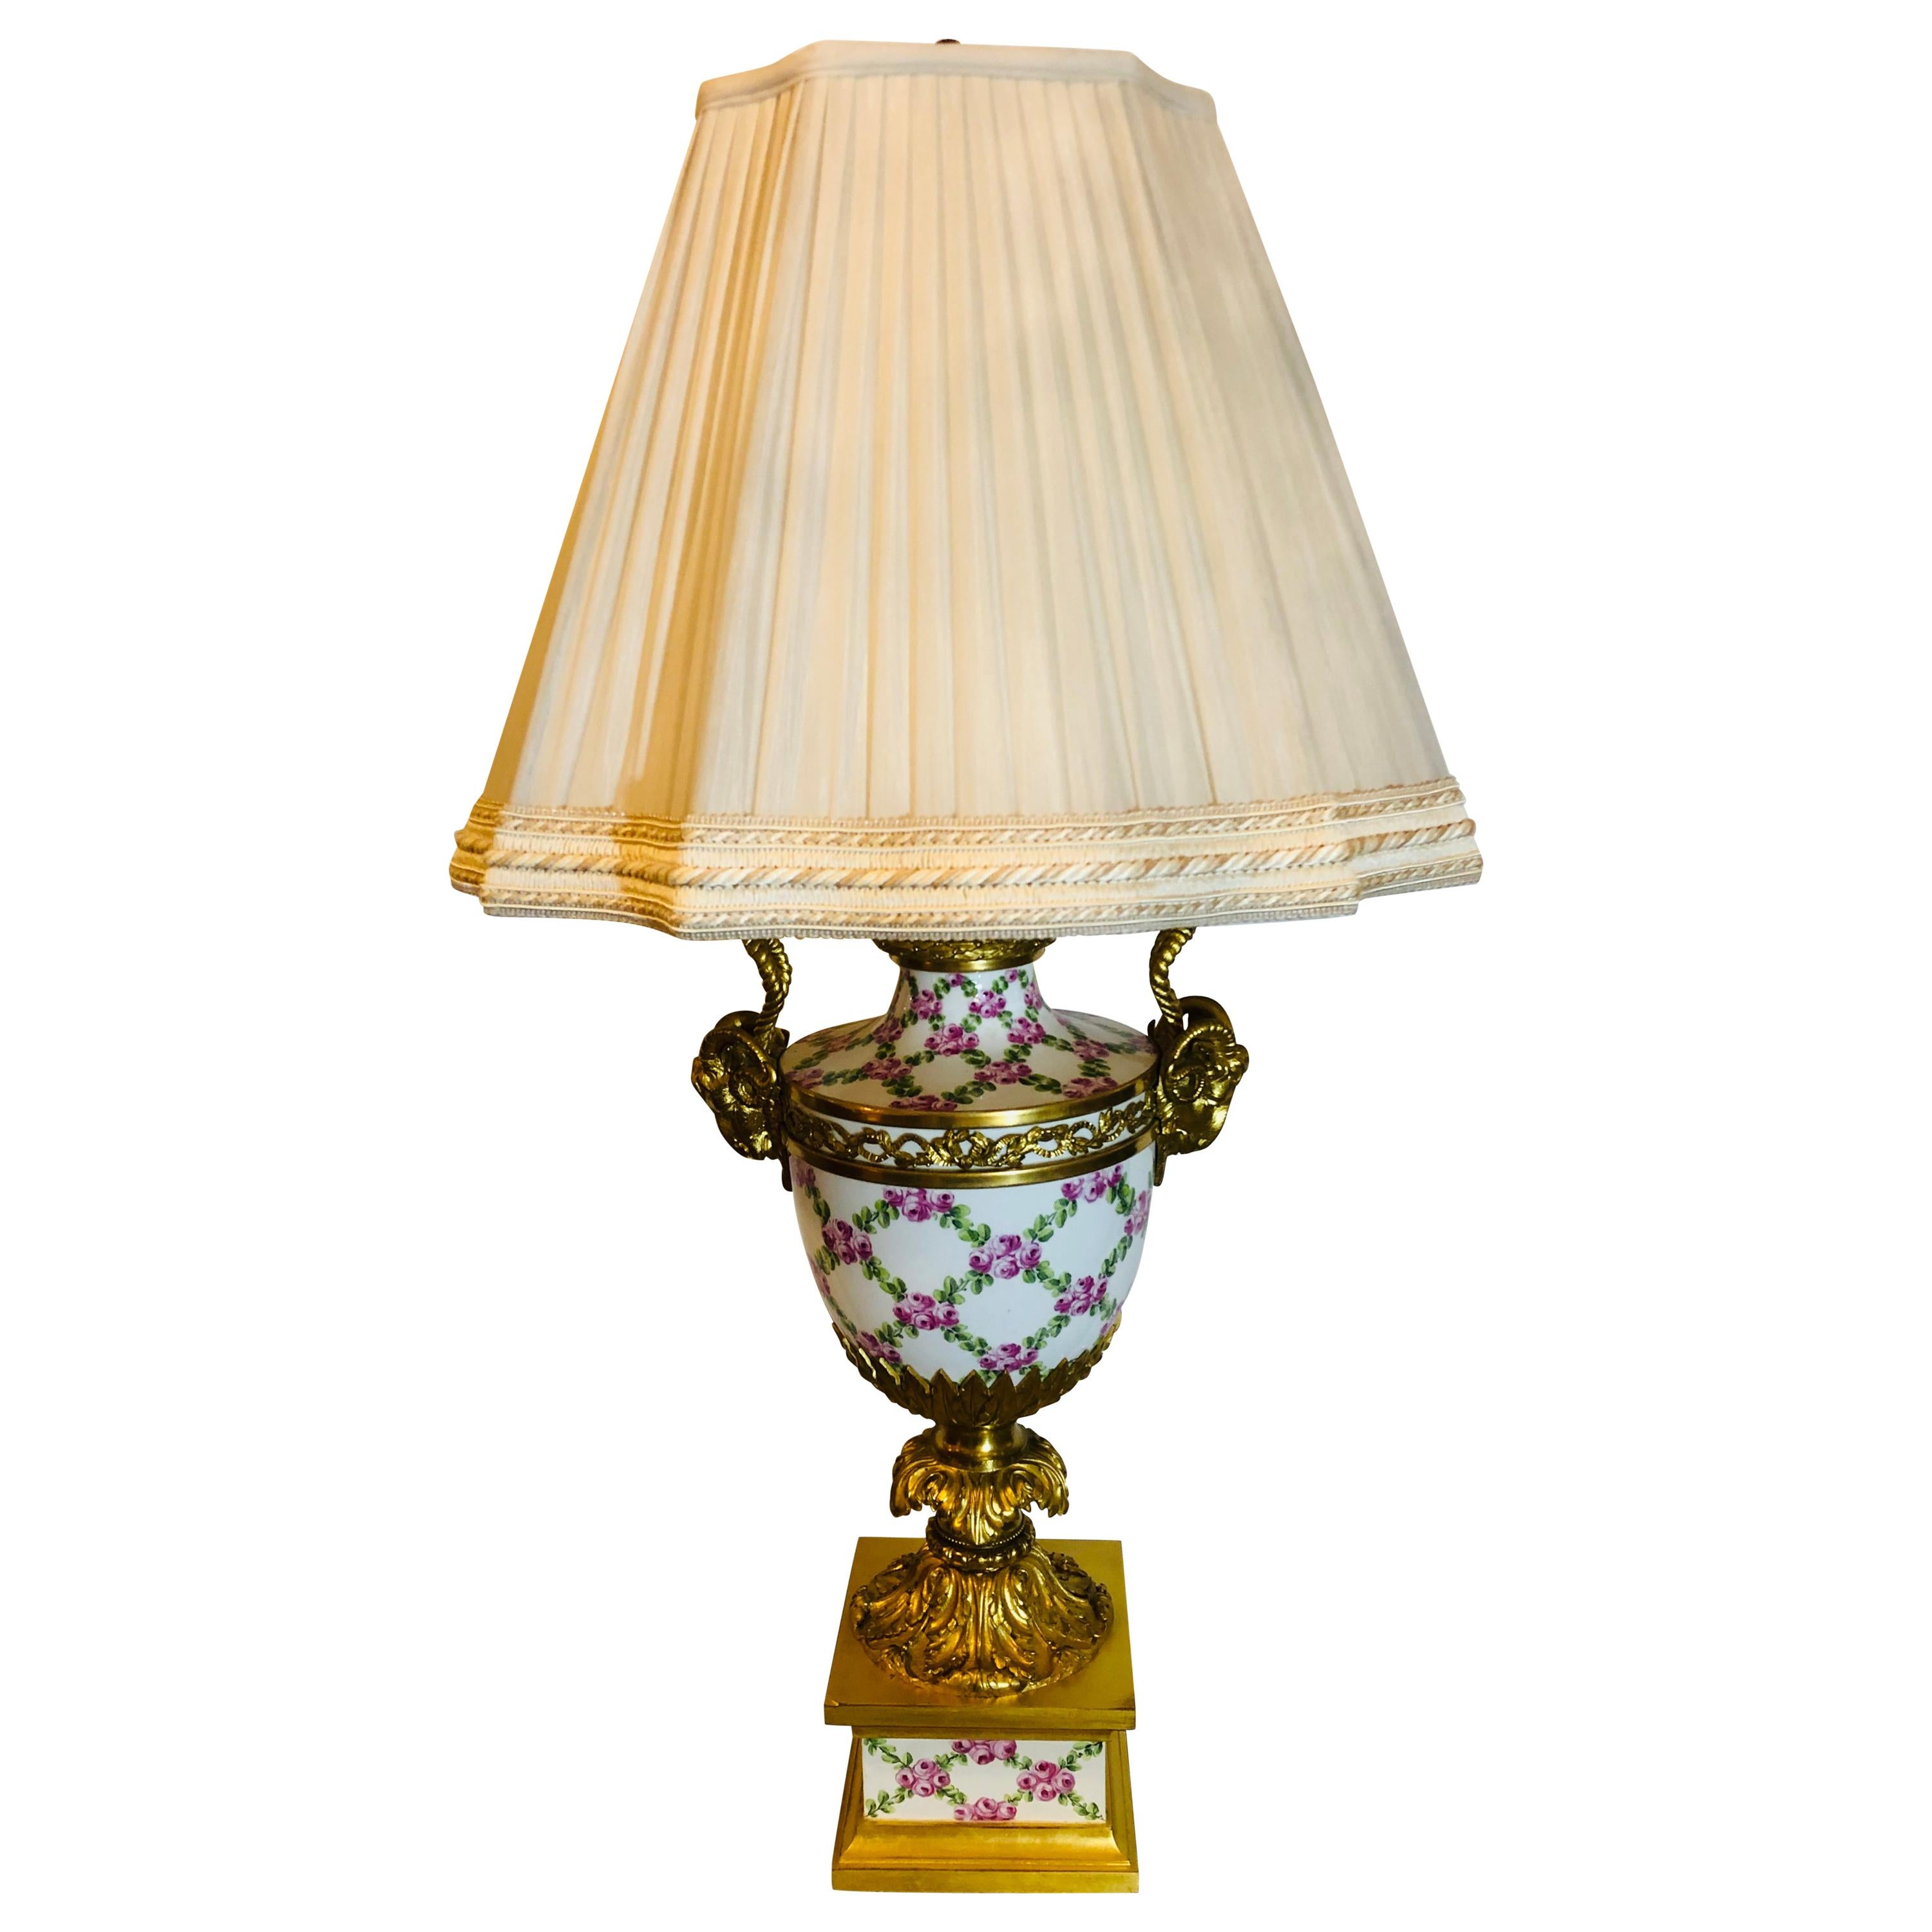 French Table Lamp Trellis Floral Porcelain Urn with Rams Head Gilt Bronze Mounts